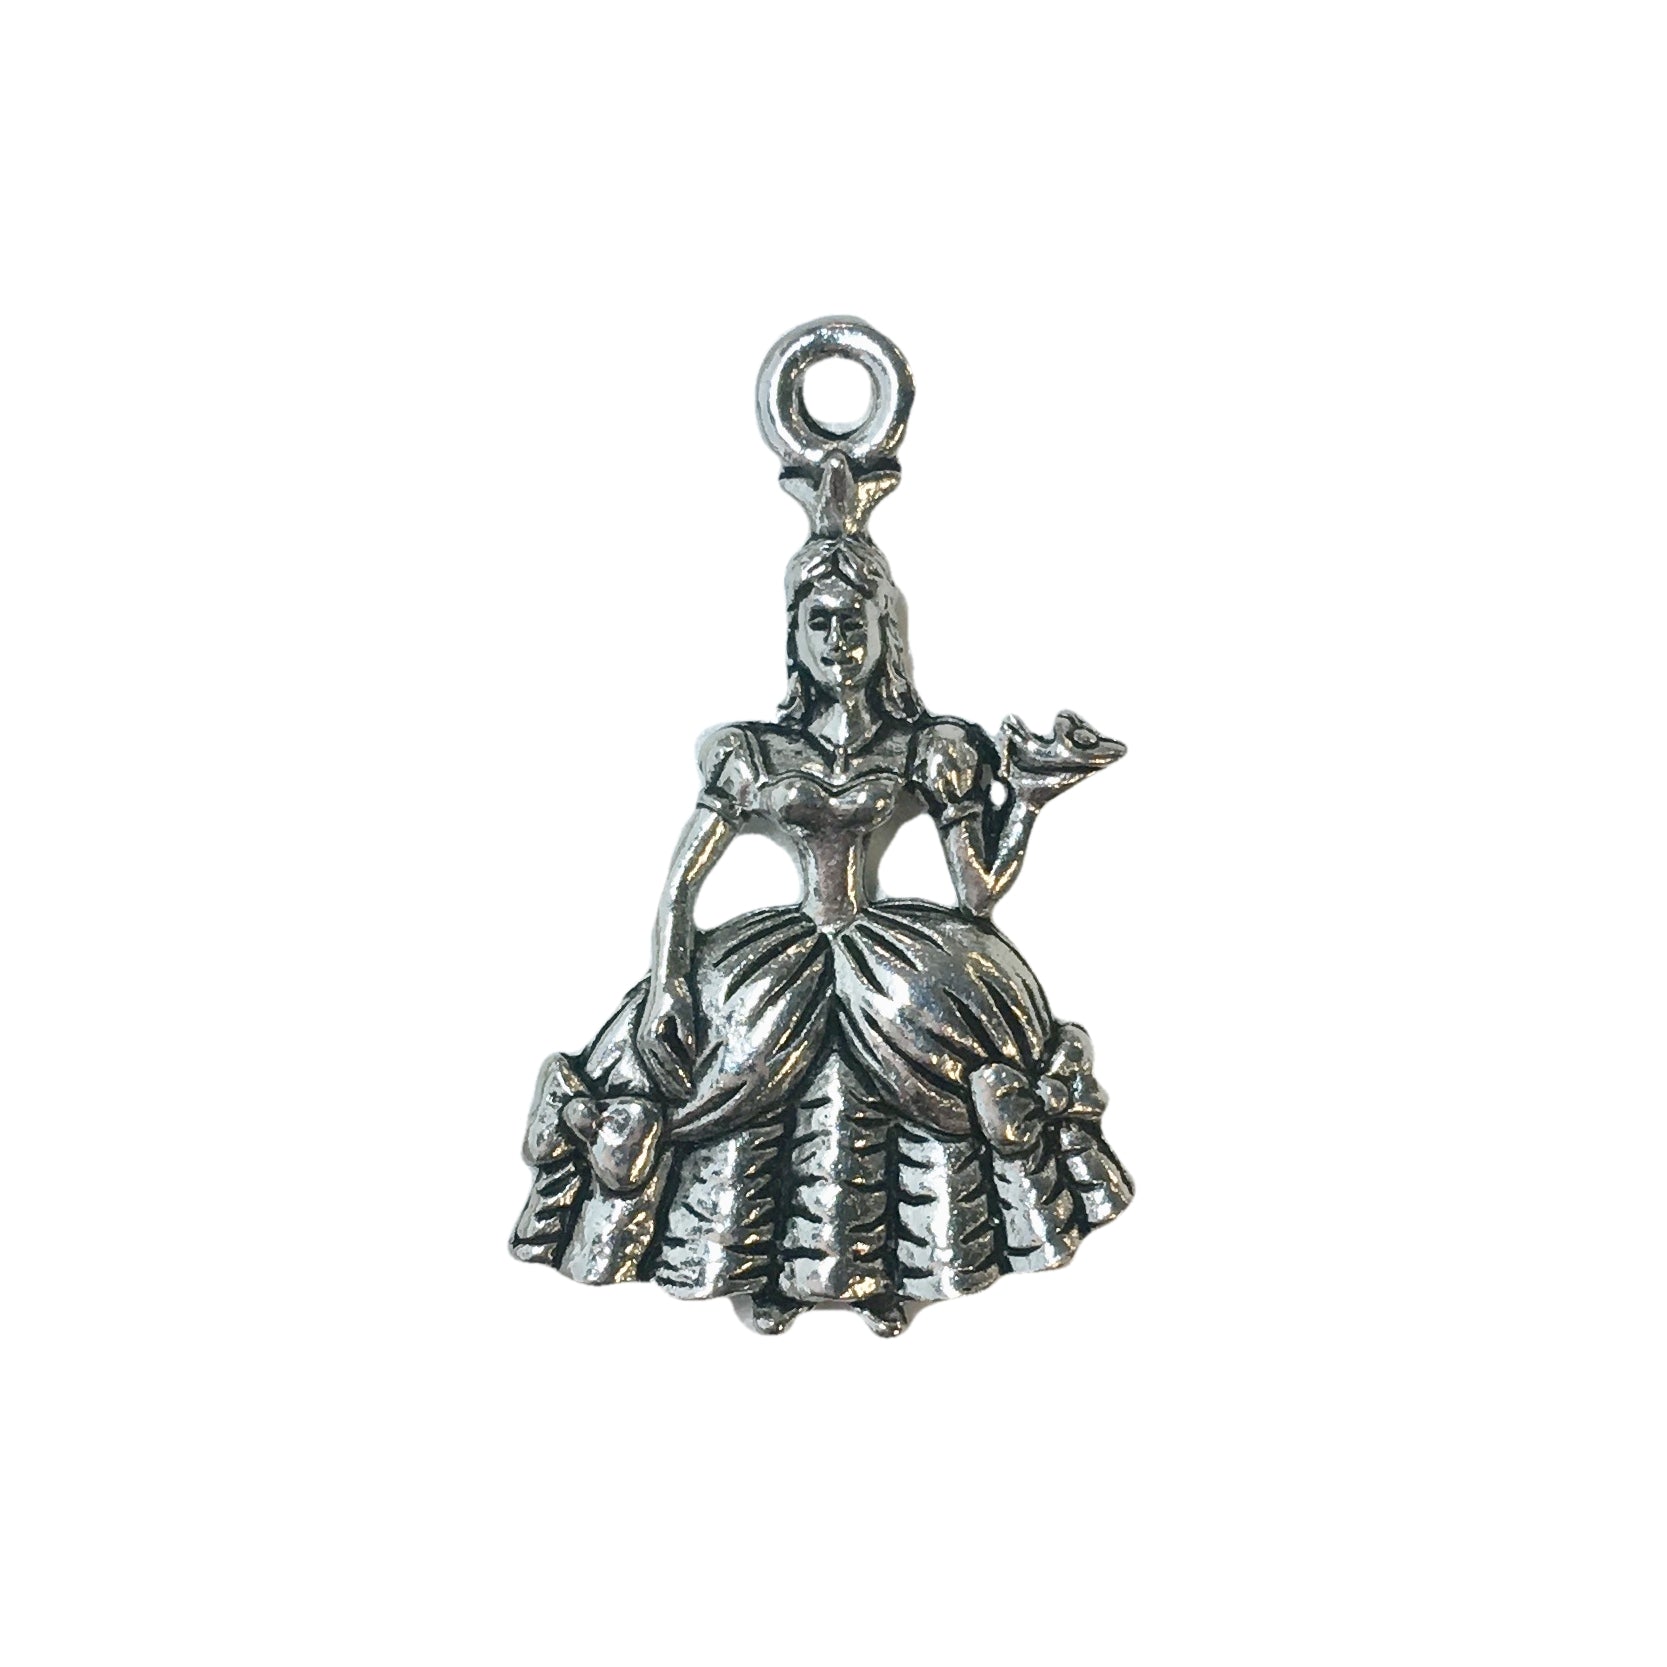 Princess Charms - Qty of 5 Charms - Lead Free Pewter Silver - American Made